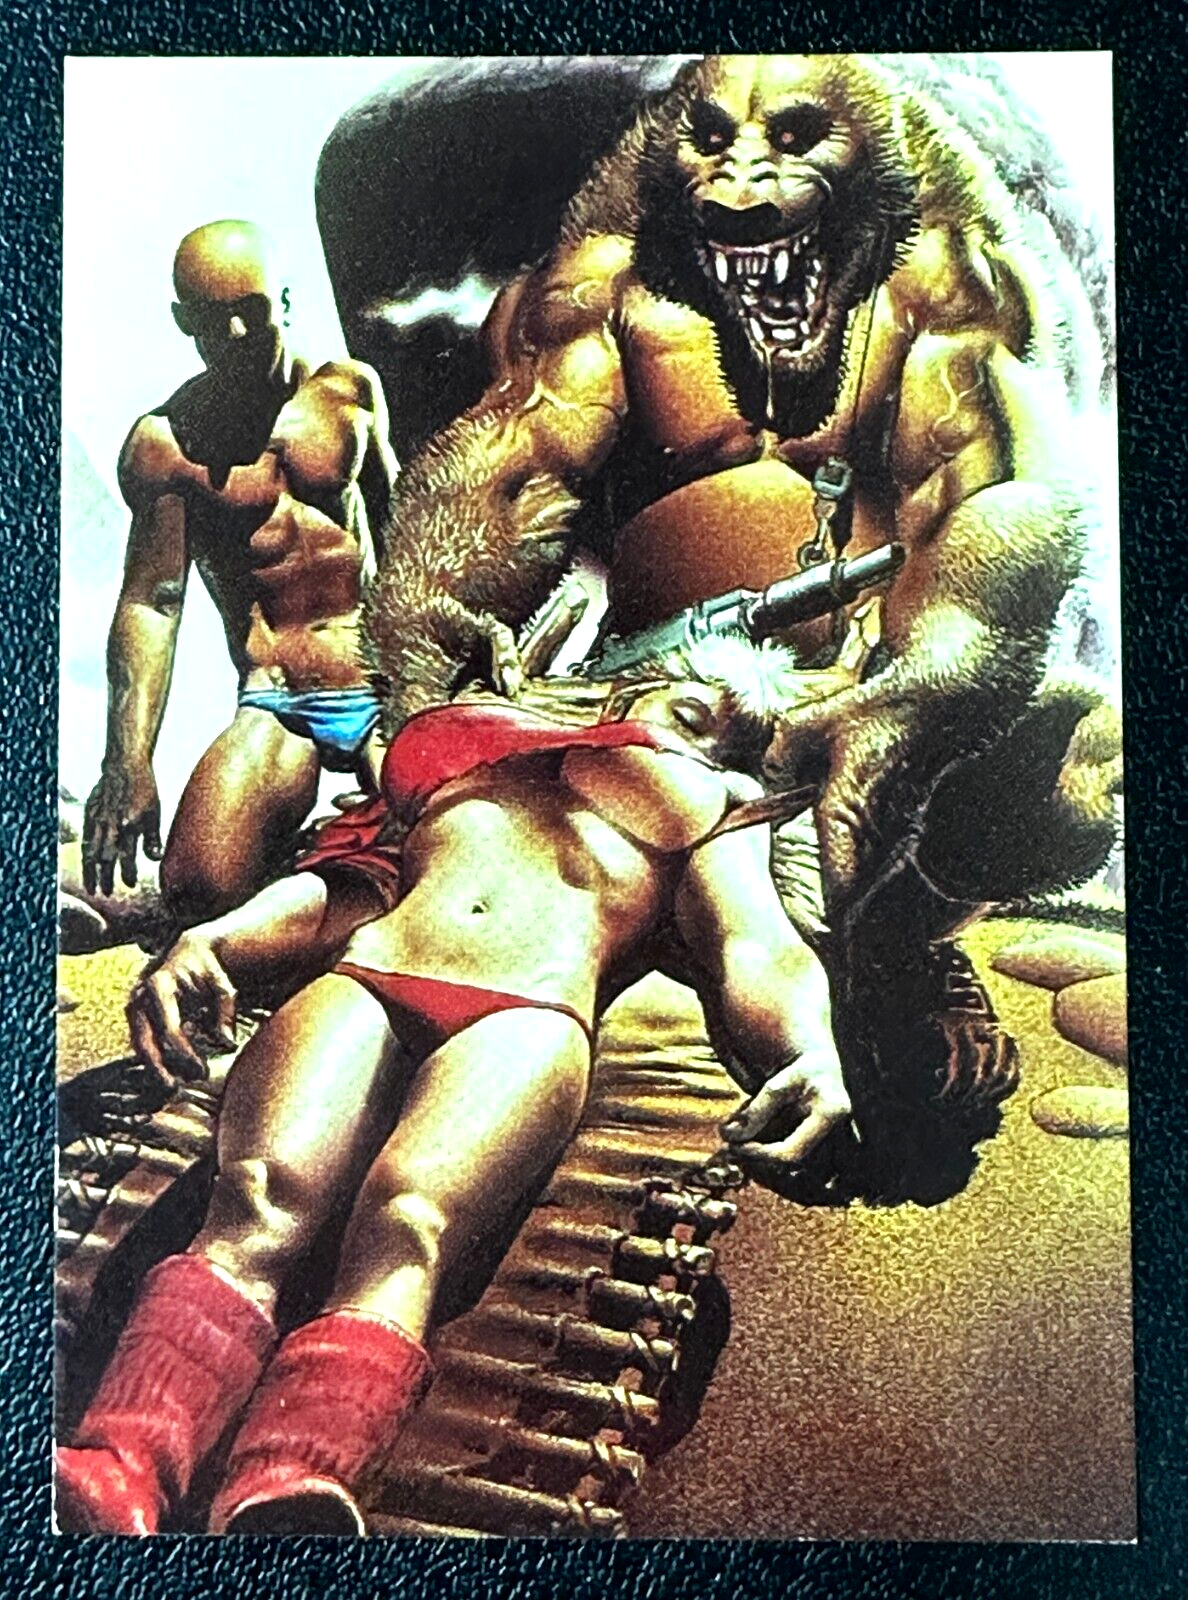 1993 Richard Corben Signed Dealers Promo Card from Comic Images